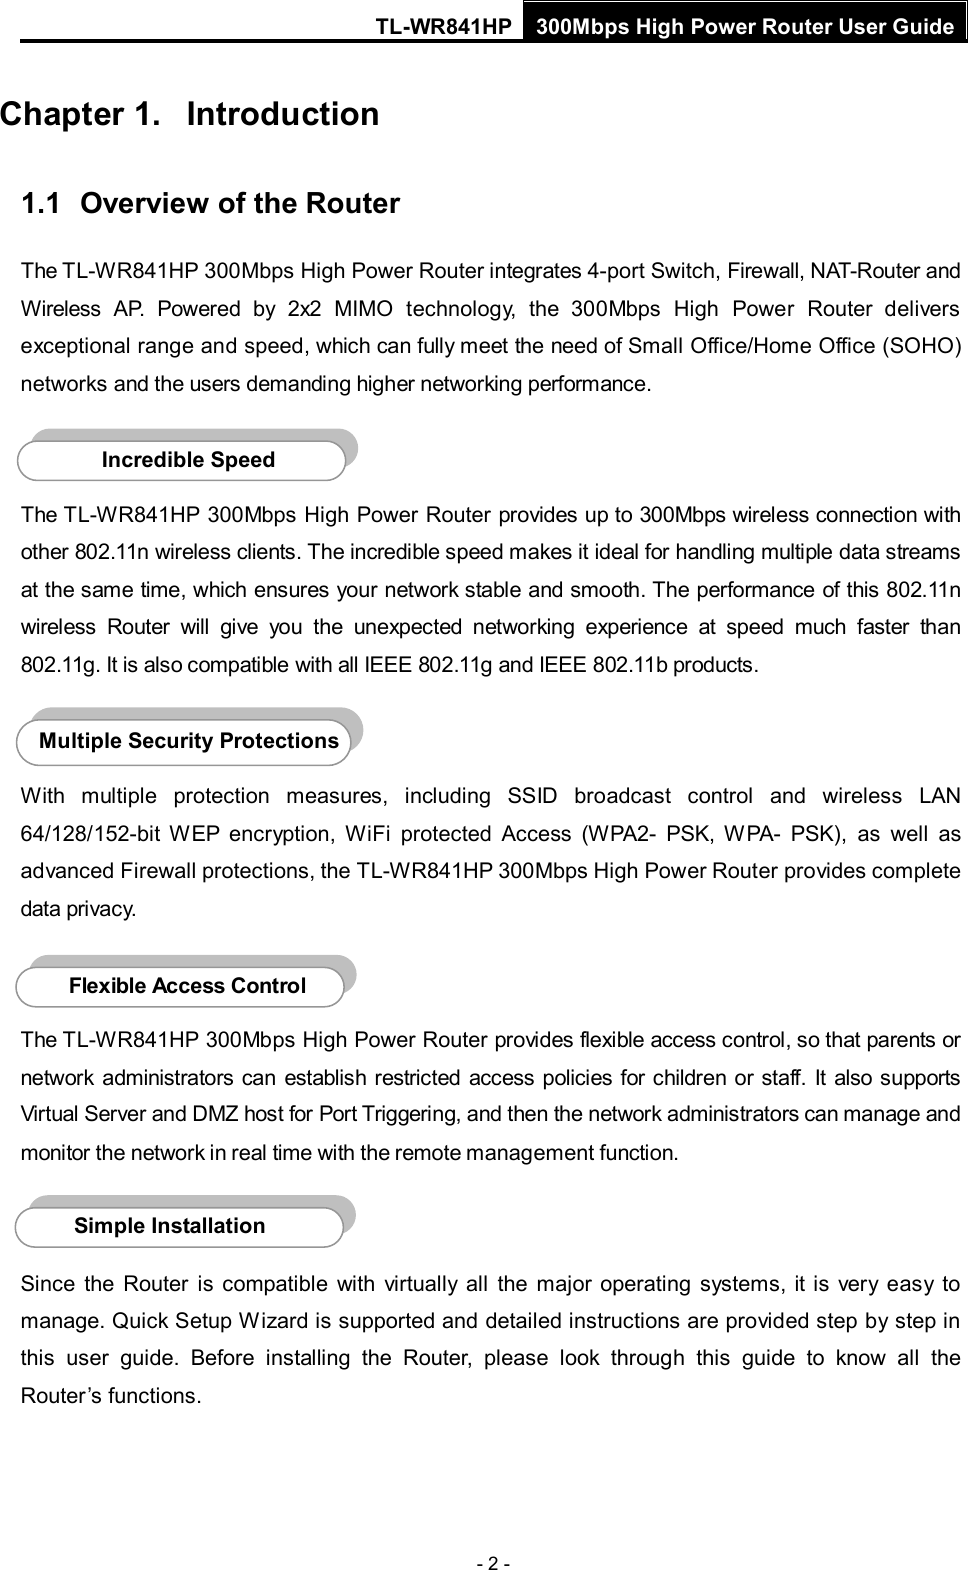 TL-WR841HP 300Mbps High Power Router User Guide  - 2 - Chapter 1. Introduction 1.1 Overview of the Router The TL-WR841HP 300Mbps High Power Router integrates 4-port Switch, Firewall, NAT-Router and Wireless AP. Powered by  2x2  MIMO technology,  the 300Mbps High Power Router delivers exceptional range and speed, which can fully meet the need of Small Office/Home Office (SOHO) networks and the users demanding higher networking performance.  The TL-WR841HP 300Mbps High Power Router provides up to 300Mbps wireless connection with other 802.11n wireless clients. The incredible speed makes it ideal for handling multiple data streams at the same time, which ensures your network stable and smooth. The performance of this 802.11n wireless  Router will give you the unexpected networking experience at speed much faster than 802.11g. It is also compatible with all IEEE 802.11g and IEEE 802.11b products.  With multiple protection measures, including SSID broadcast control and wireless LAN 64/128/152-bit WEP encryption,  WiFi protected Access (WPA2-  PSK, WPA-  PSK), as well as advanced Firewall protections, the TL-WR841HP 300Mbps High Power Router provides complete data privacy.    The TL-WR841HP 300Mbps High Power Router provides flexible access control, so that parents or network administrators can establish restricted access policies for children or staff. It also supports Virtual Server and DMZ host for Port Triggering, and then the network administrators can manage and monitor the network in real time with the remote management function.    Since  the Router is compatible with virtually all the major operating systems, it is  very  easy to manage. Quick Setup Wizard is supported and detailed instructions are provided step by step in this user guide.  Before installing the Router, please look through this guide to know all the Router’s functions. Simple Installation Flexible Access Control  Multiple Security Protections Incredible Speed  